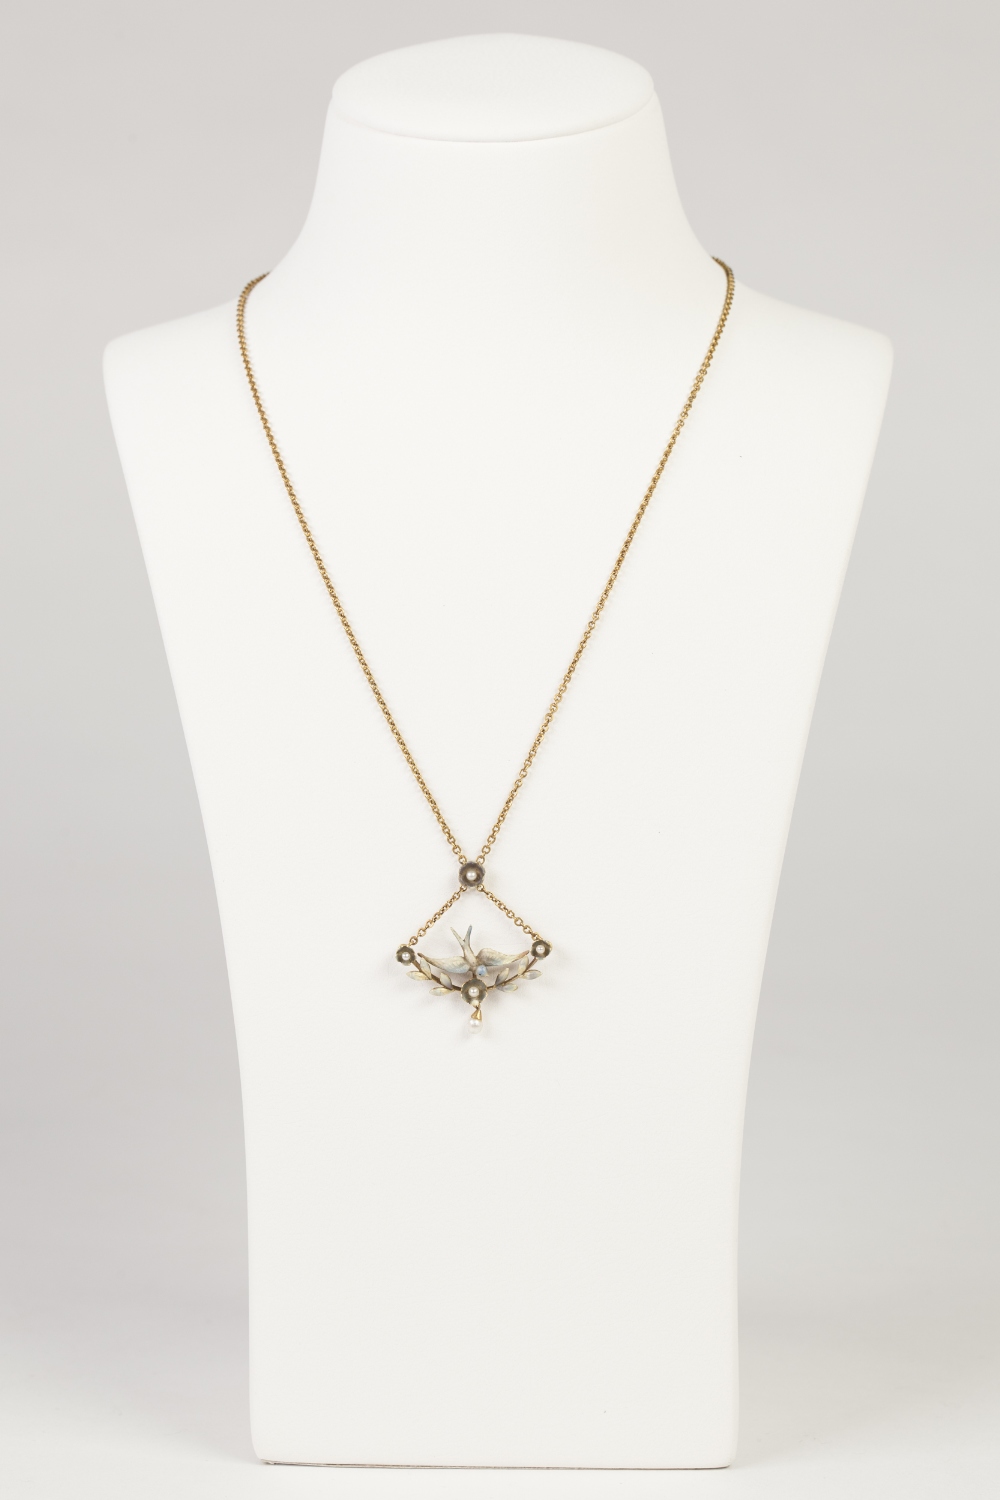 EDWARDIAN SILVER GILT CHAIN NECKLACE, with attached pendant front in the form of an enamelled